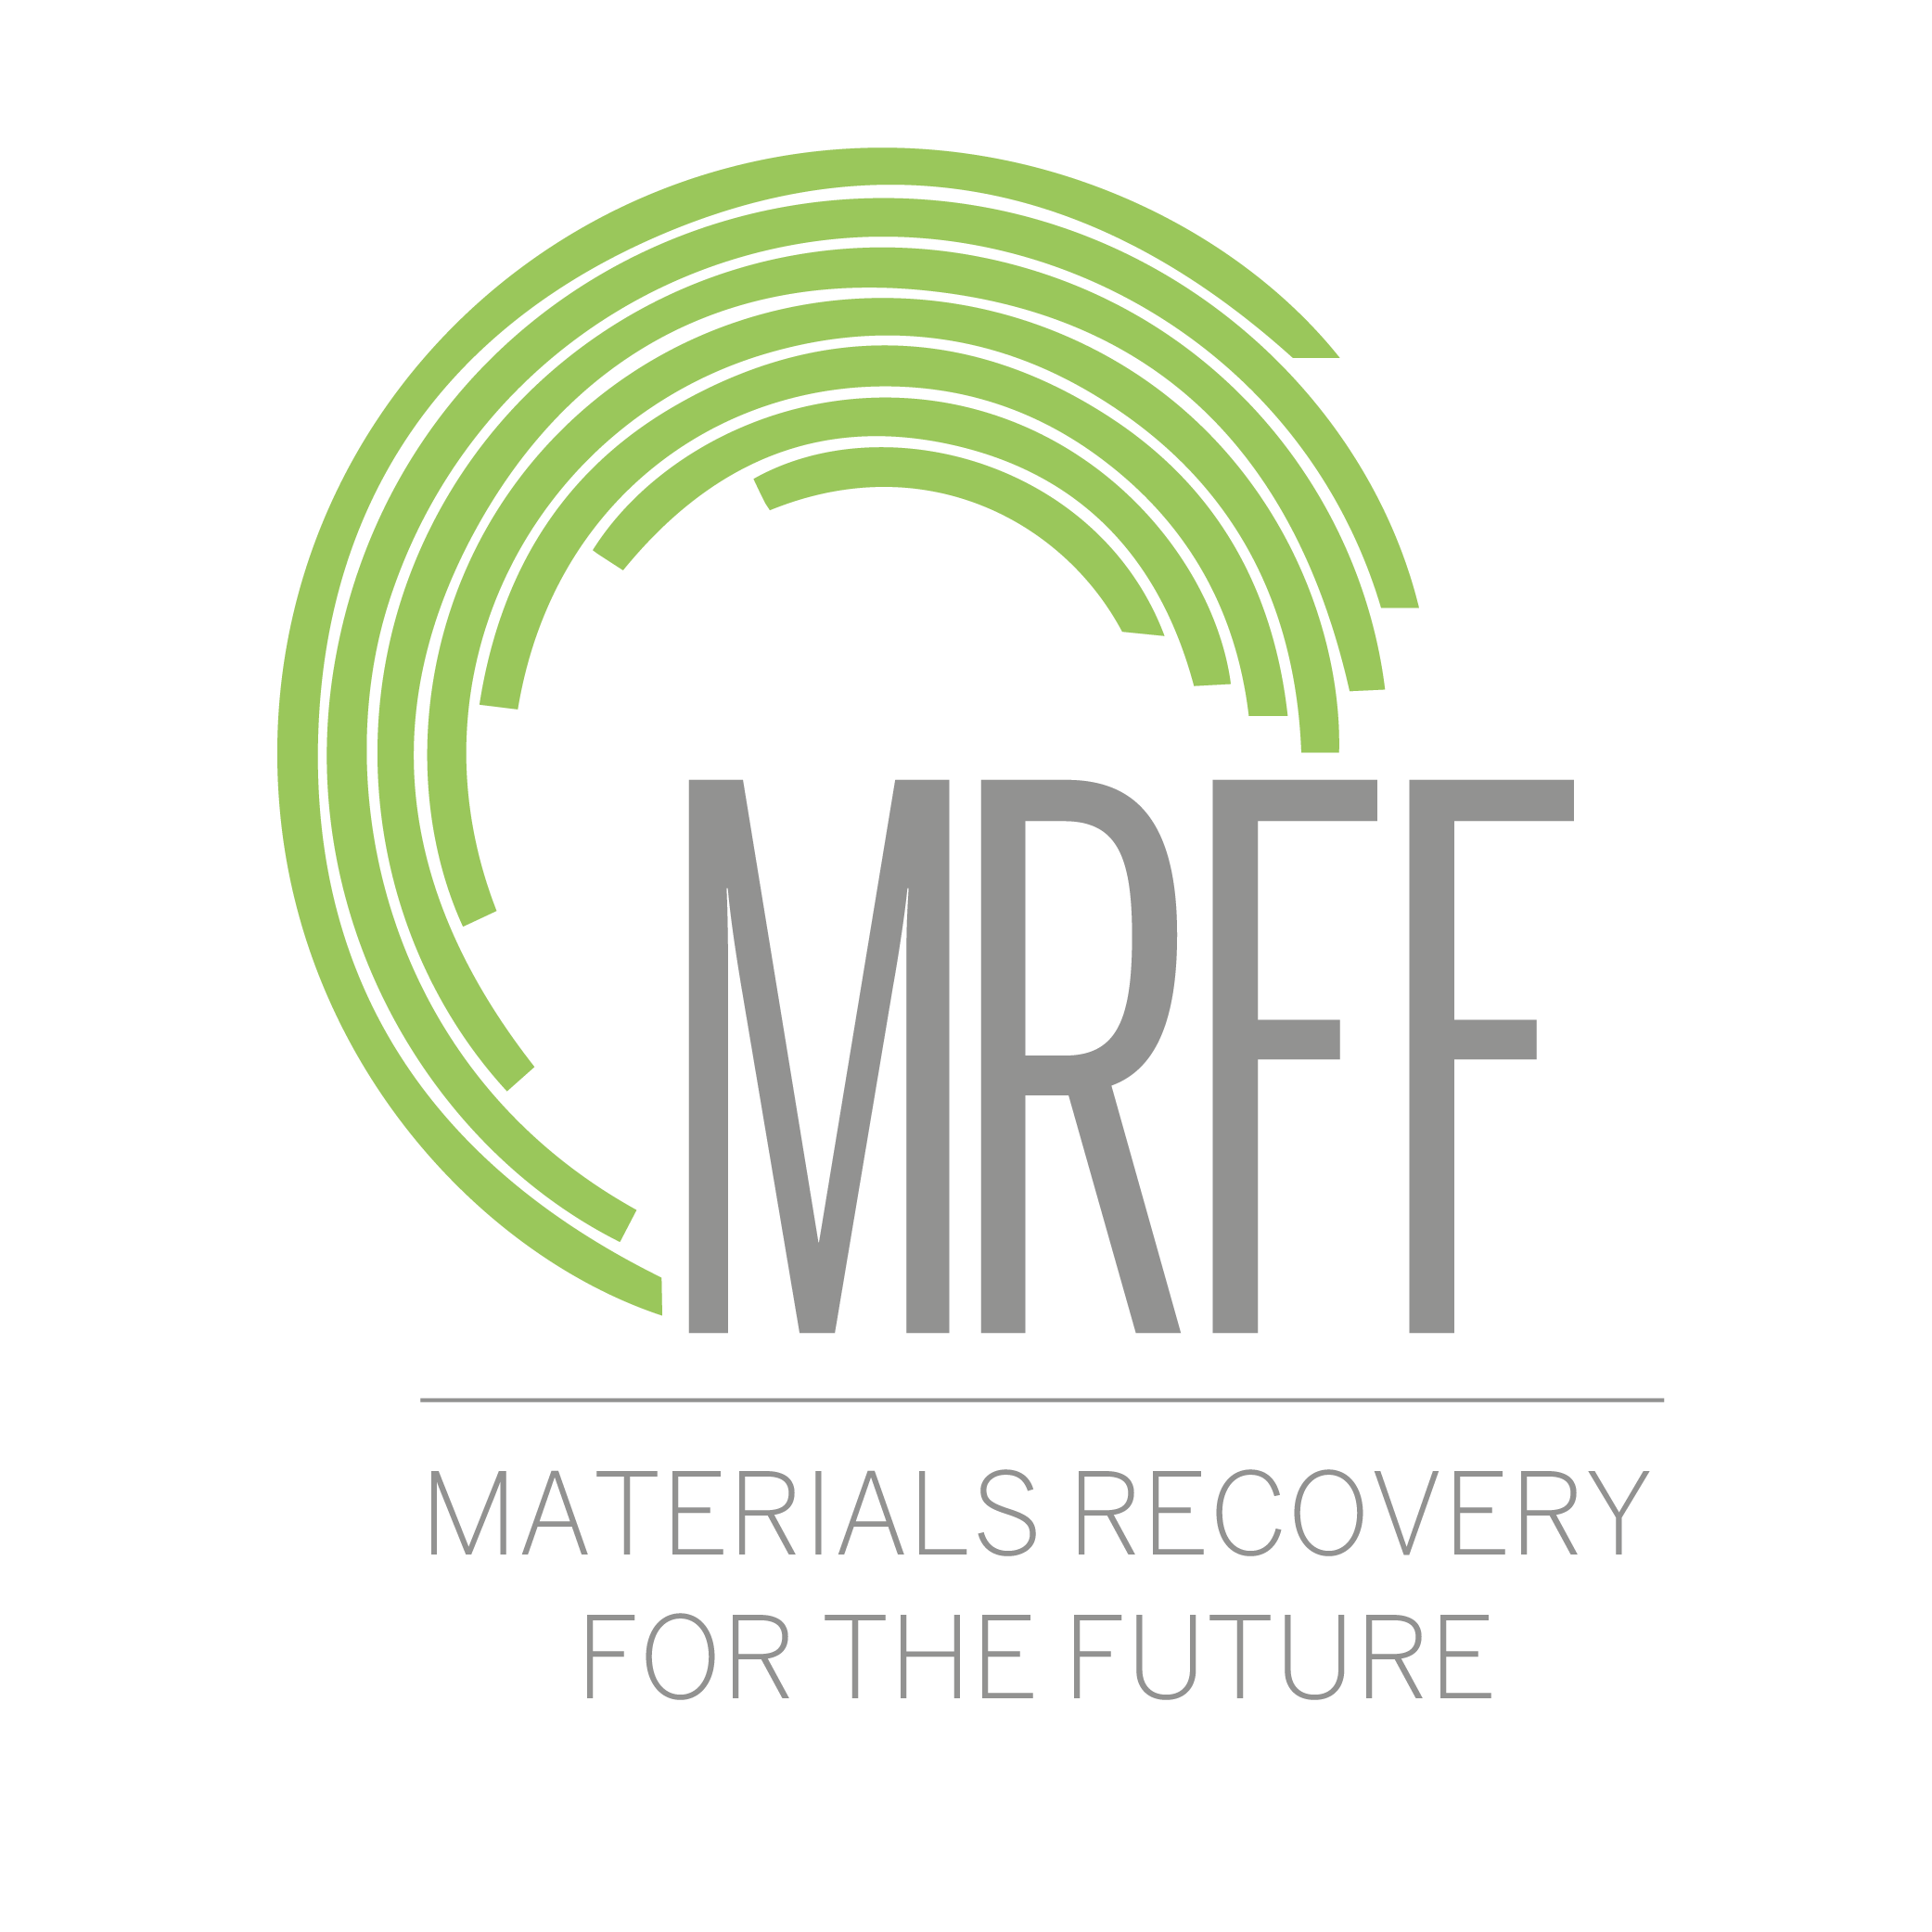 MRFF materials recovery for the future logo, flexible packaging